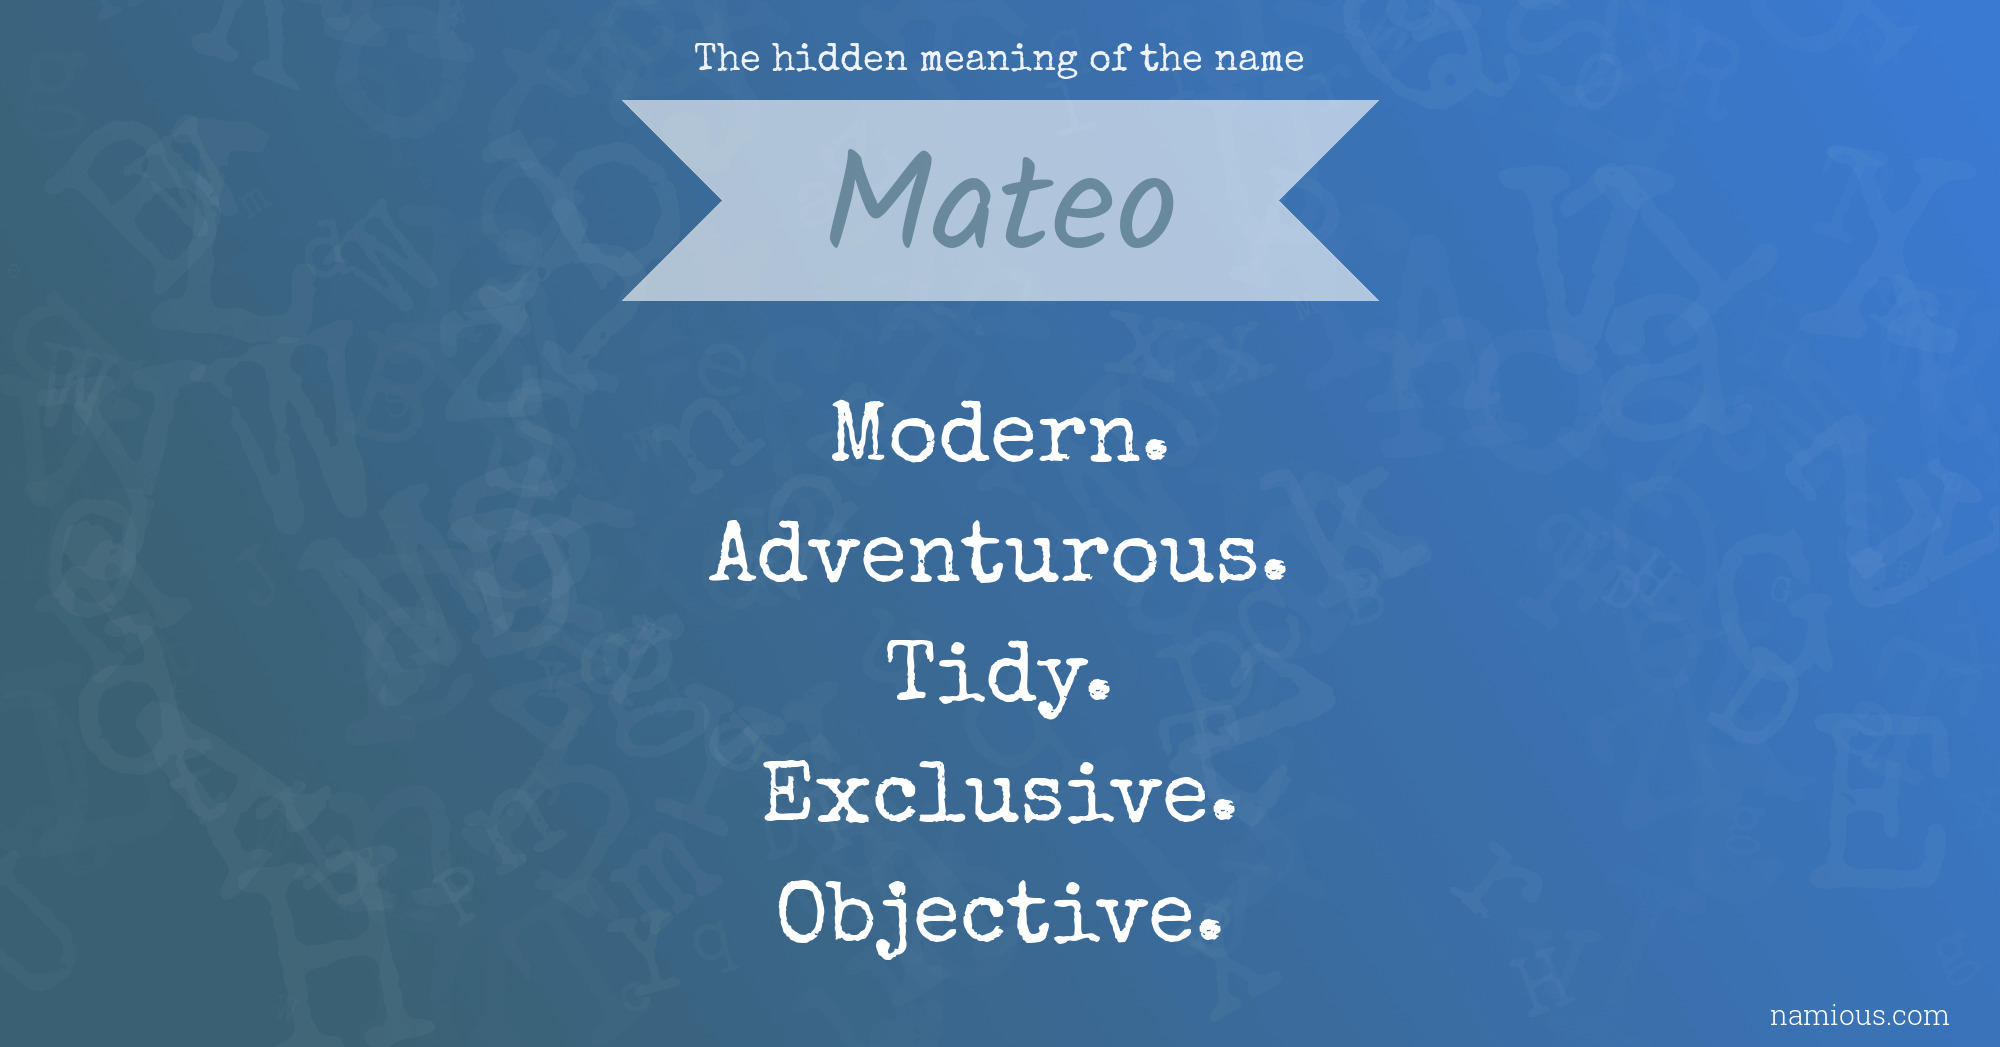 The hidden meaning of the name Mateo